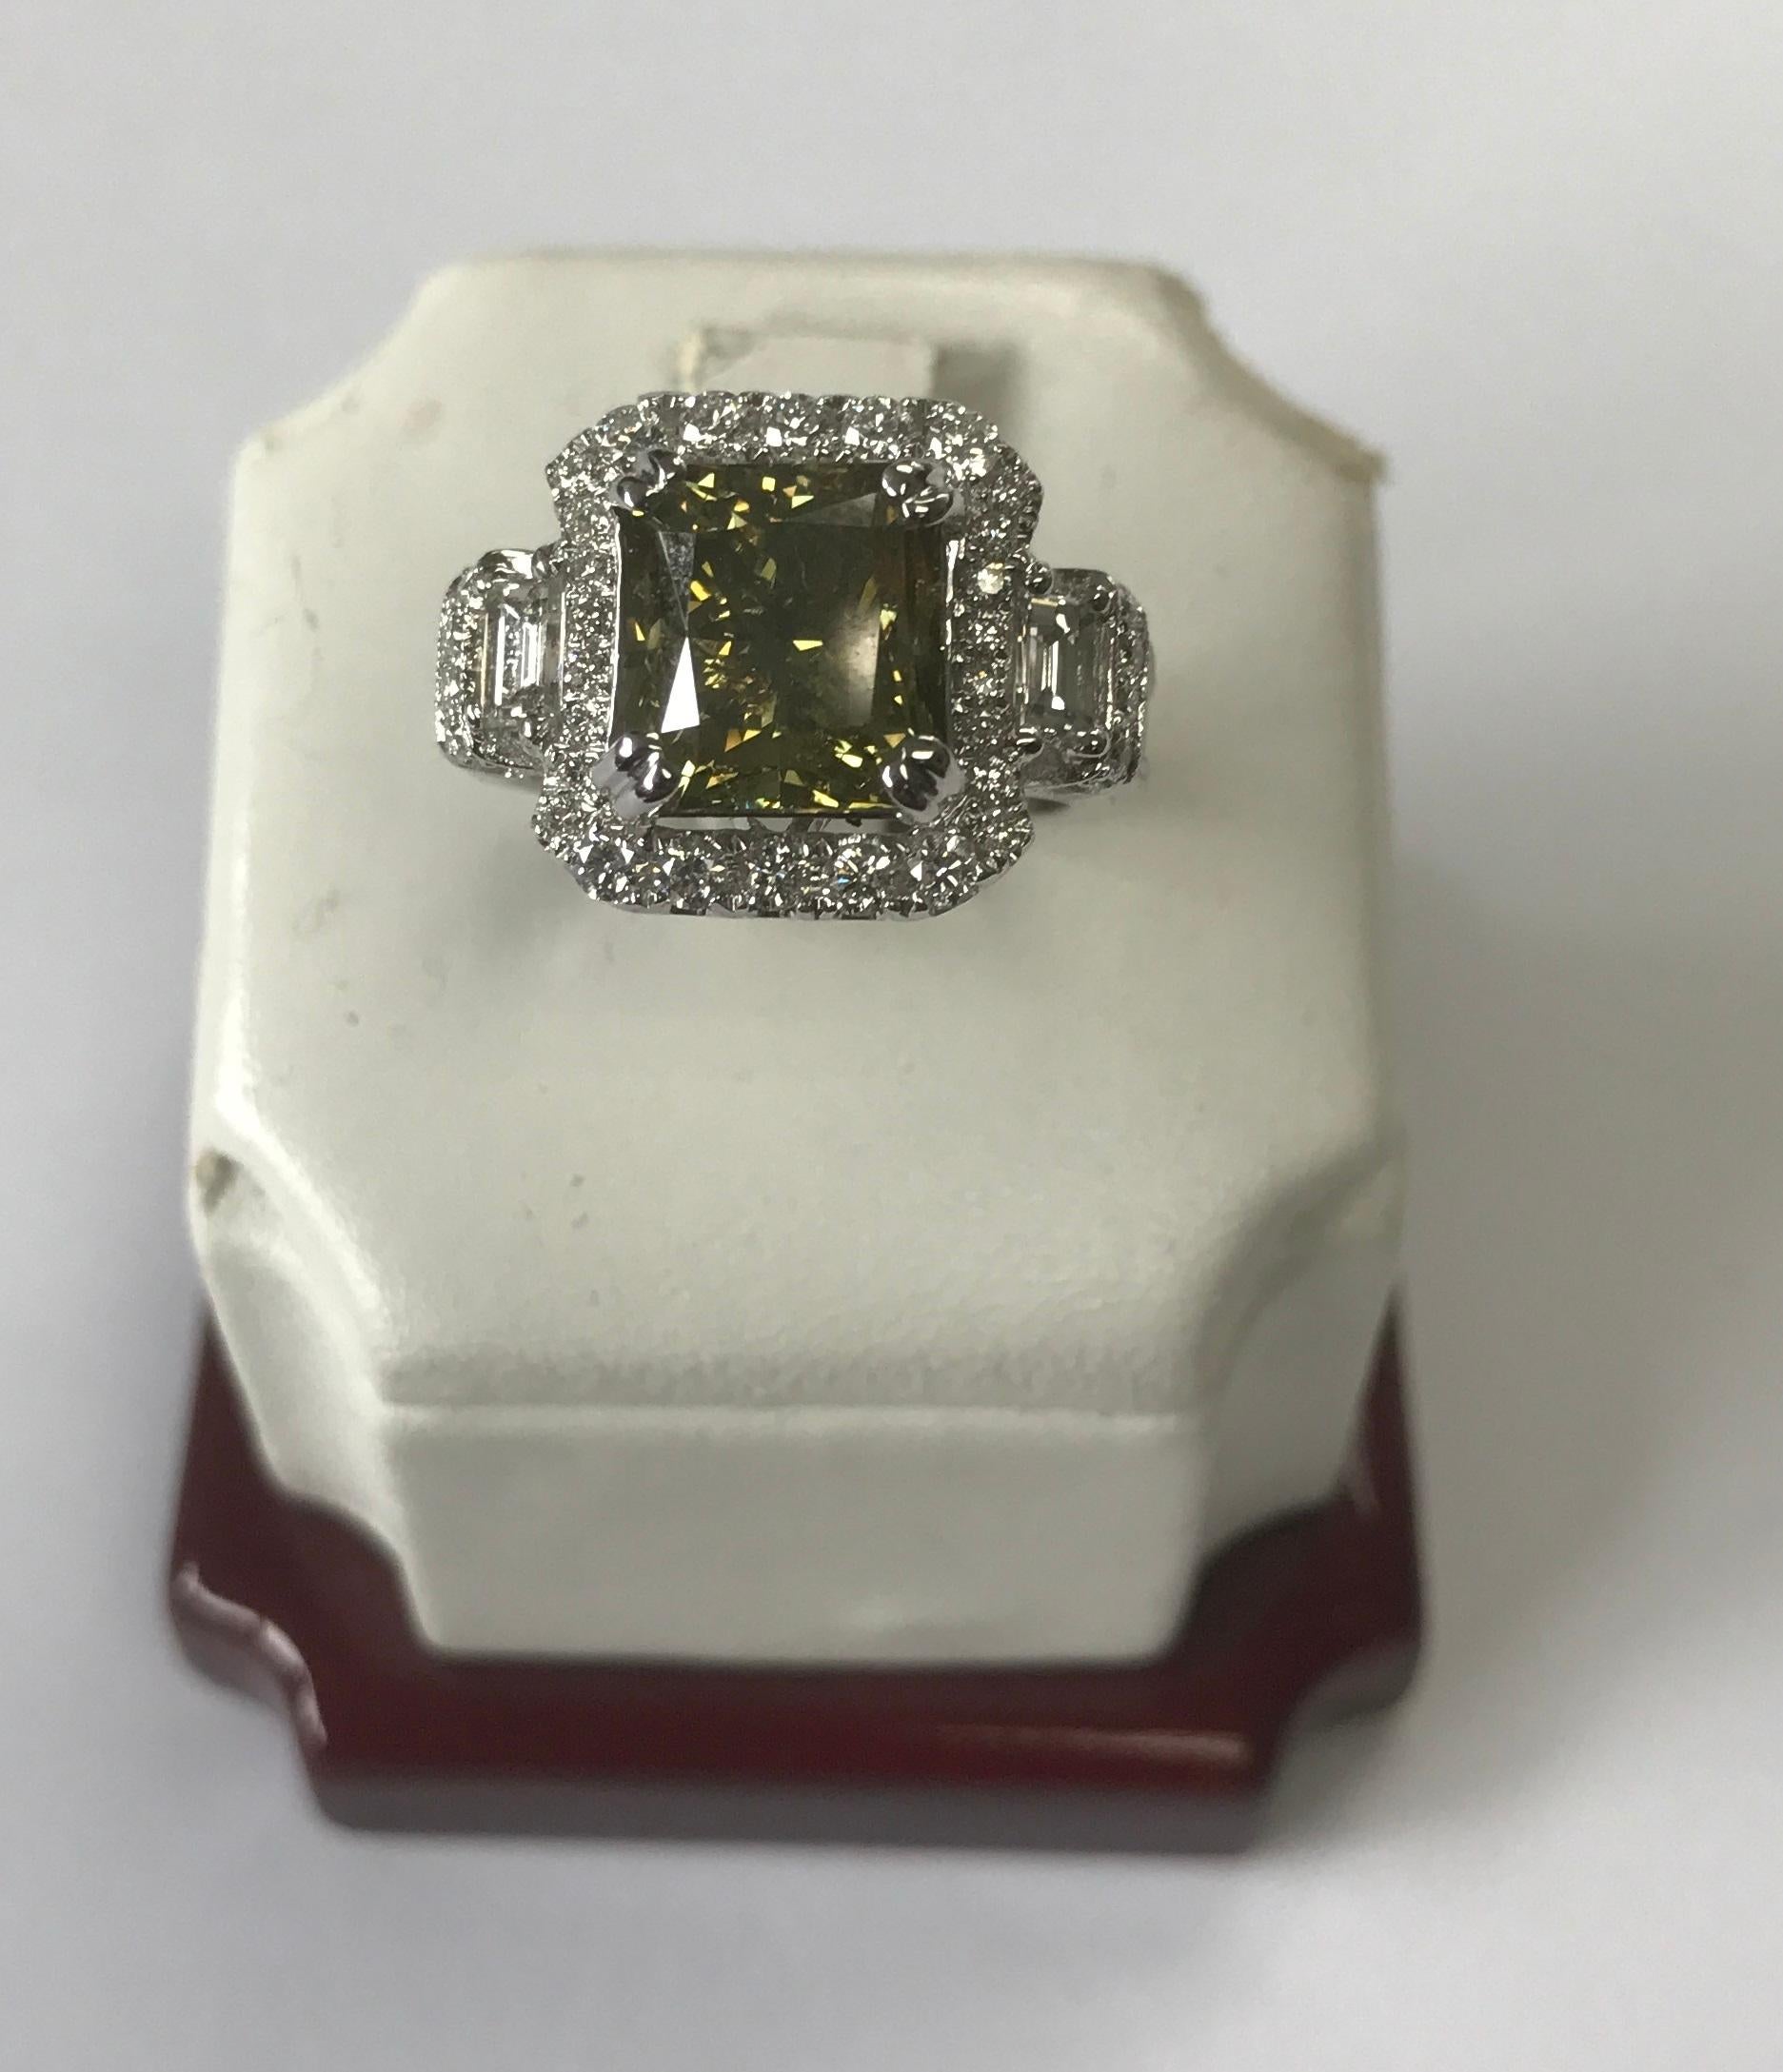 Natural Fancy Dark Brown-Greenish Yellow Cushion Diamond Weighing 5.01 carats by GIA. Beautifully paved with baguette diamonds in the halo setting. Its transparency and luster are excellent. set on 18K white gold, this ring is the ultimate gift for